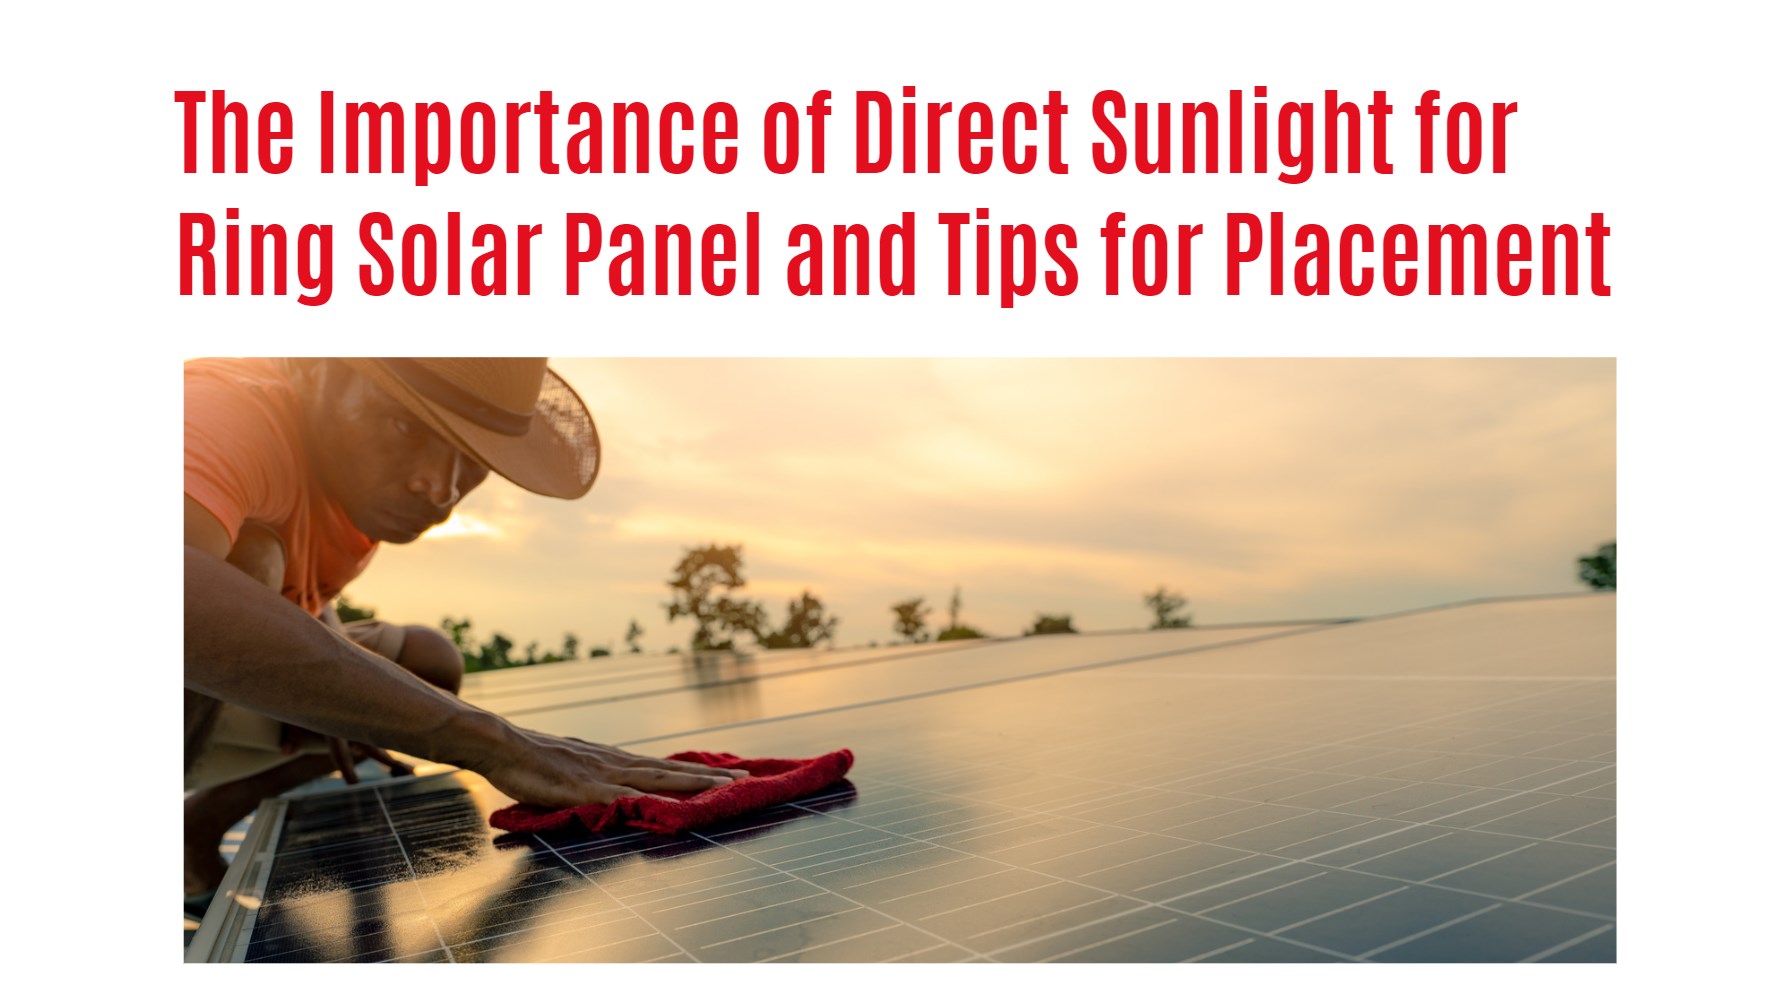 The Importance of Direct Sunlight for Ring Solar Panel and Tips for Placement